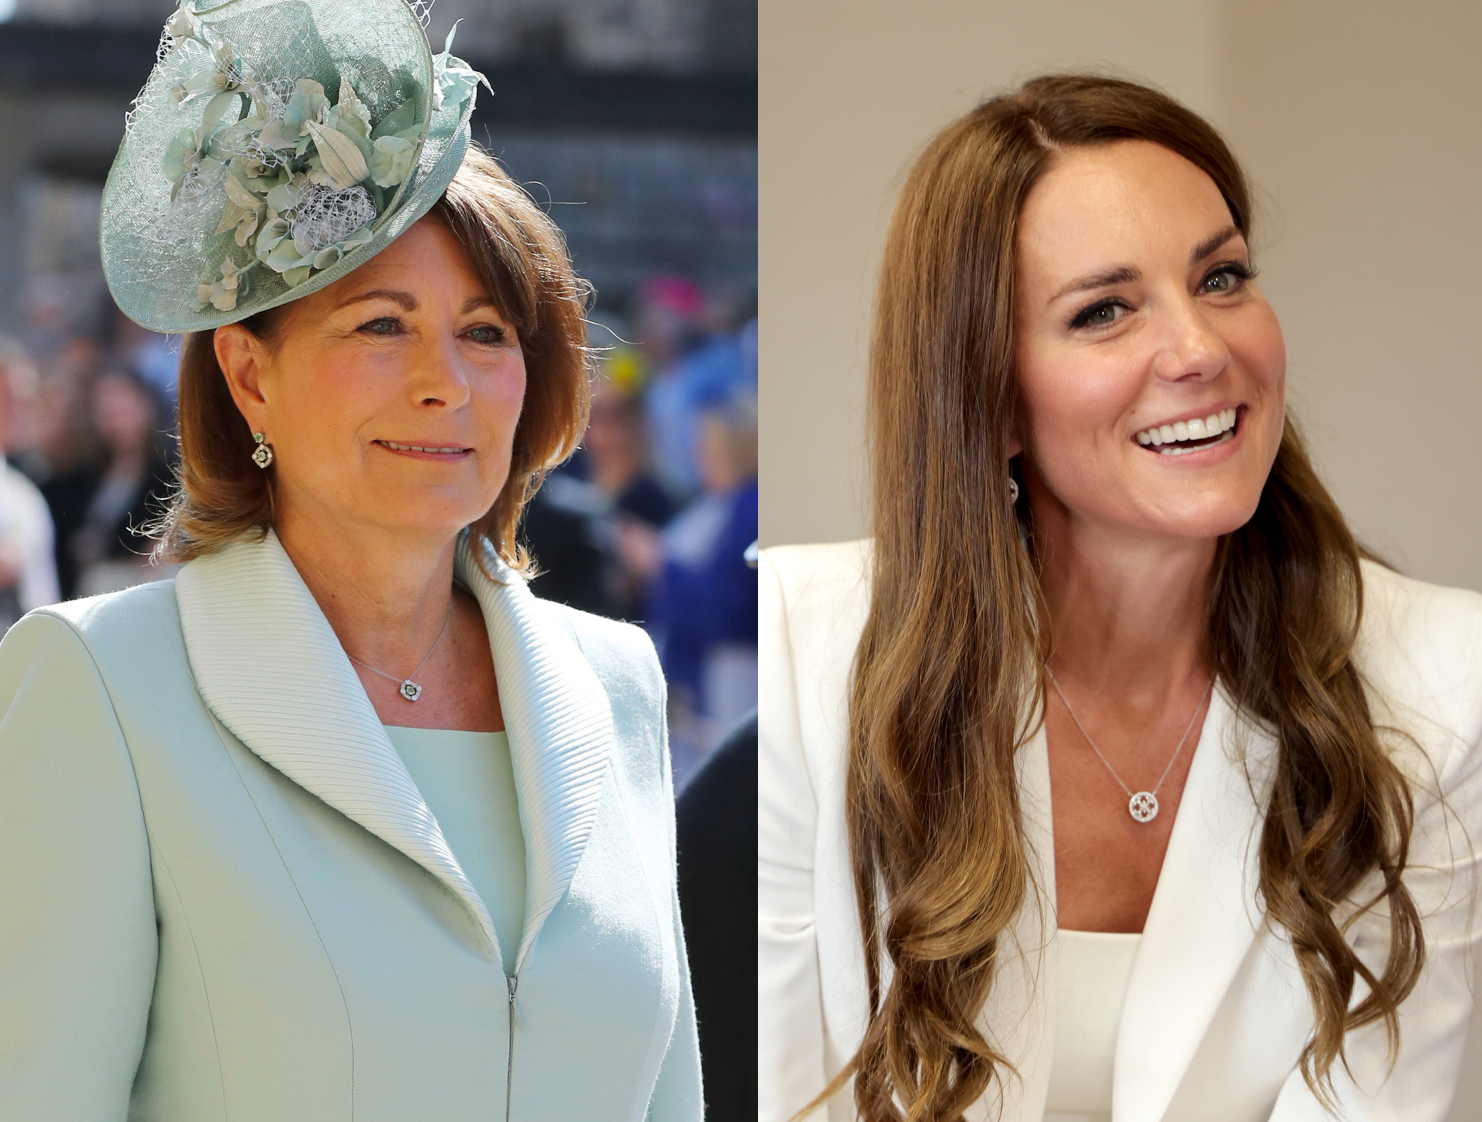 Carole Middleton has been the quiet driving force holding the Windsors together in the wake of her daughter’s shock cancer diagnosis, sources close to the Middletons have revealed